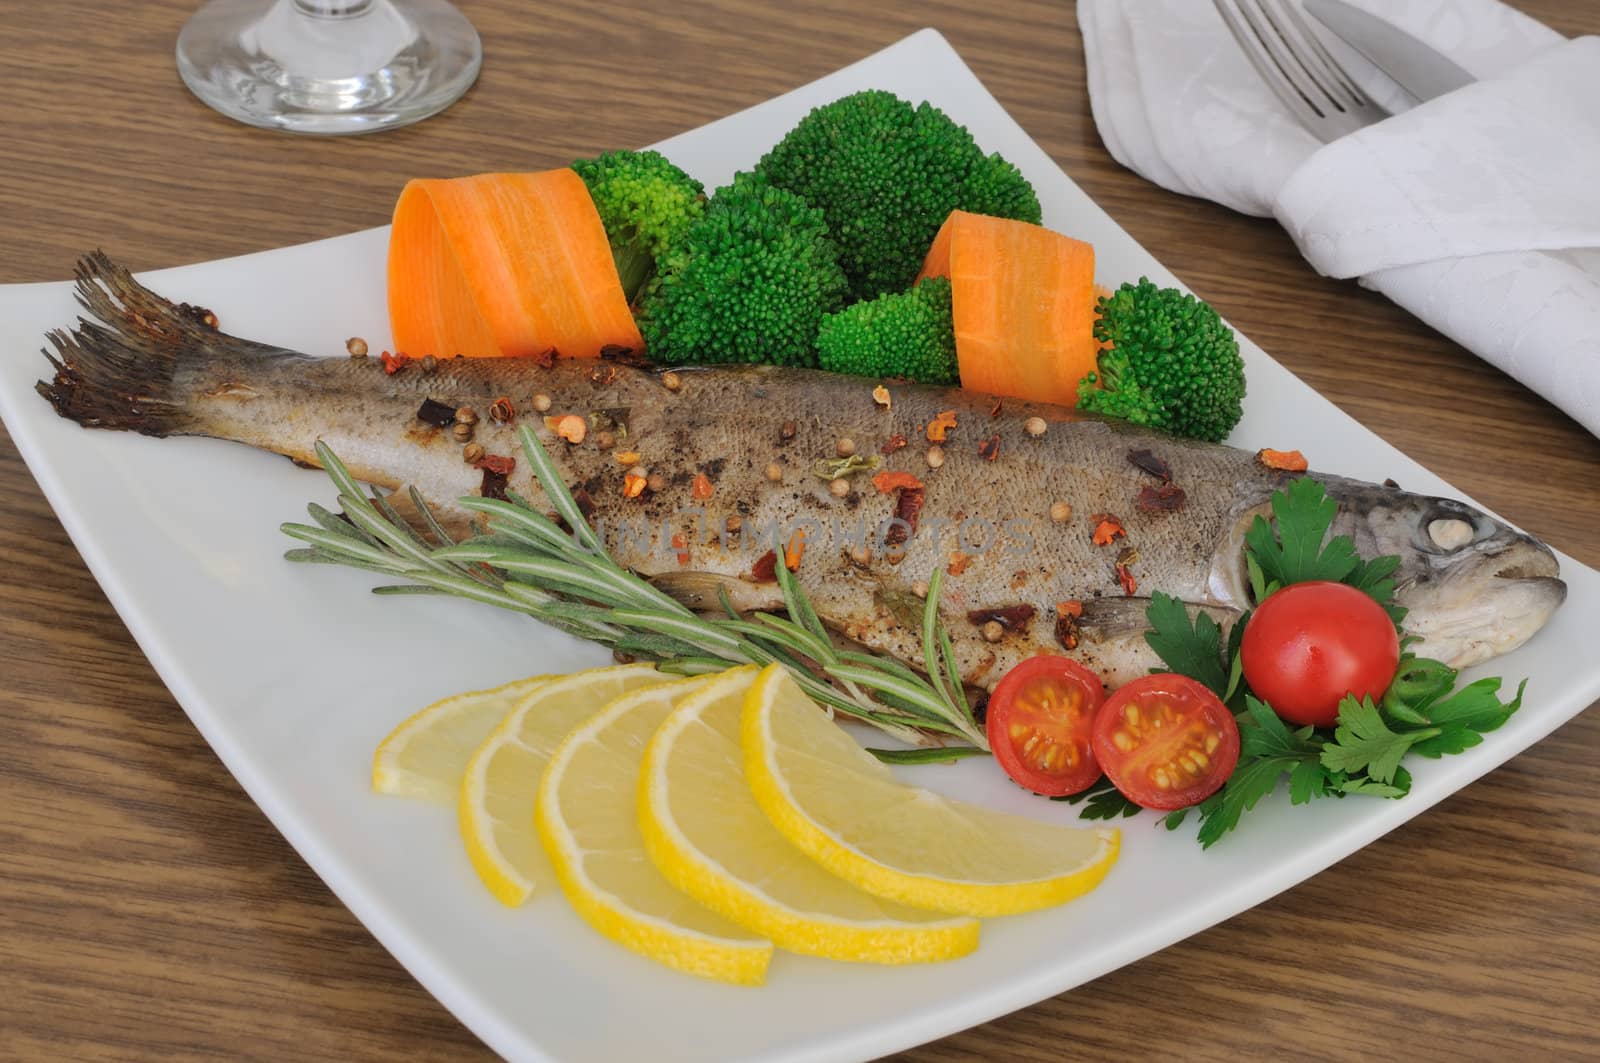 Baked sea bass in spices with broccoli and carrots